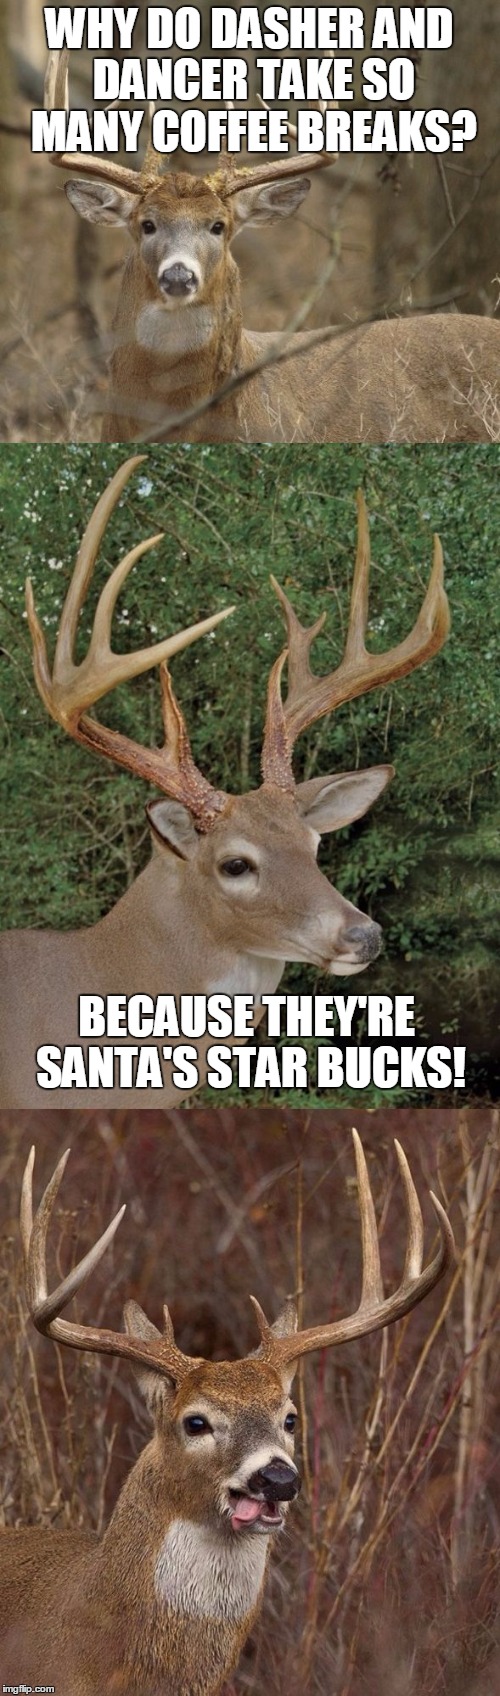 So *that's* how Santa stays awake all night to deliver presents... | WHY DO DASHER AND DANCER TAKE SO MANY COFFEE BREAKS? BECAUSE THEY'RE SANTA'S STAR BUCKS! | image tagged in reindeer,santa,coffee,starbucks | made w/ Imgflip meme maker